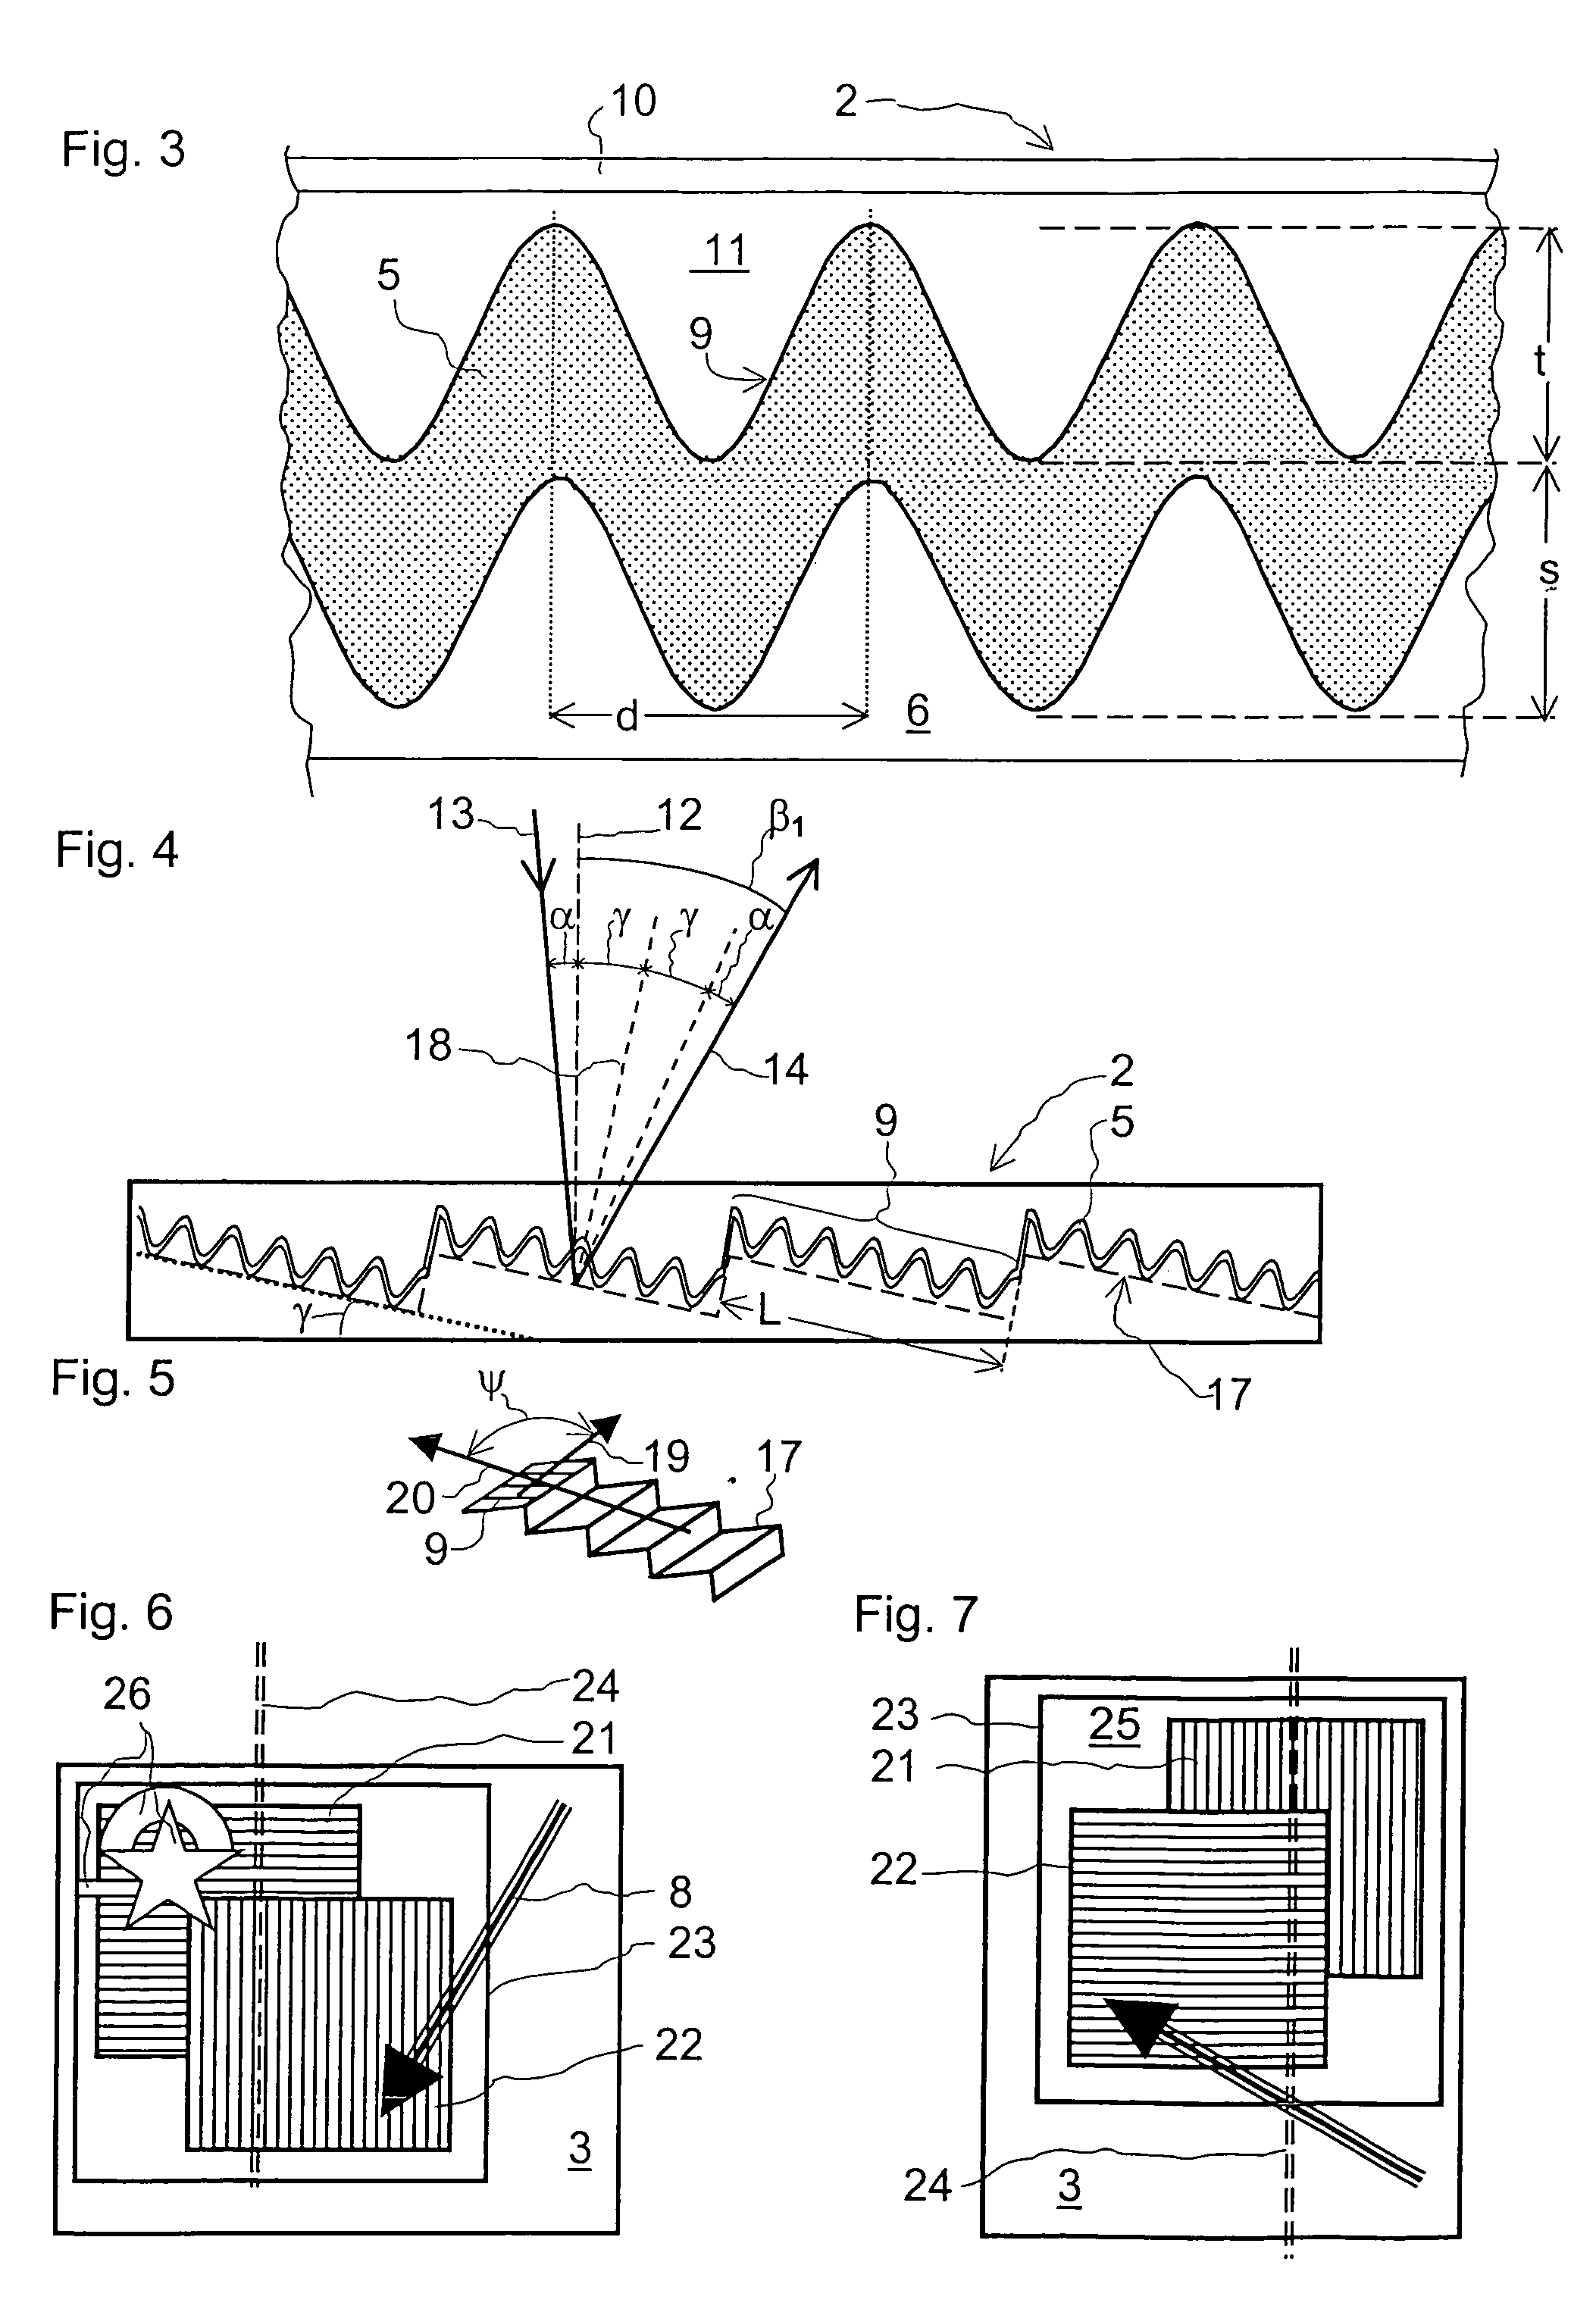 Diffractive security element having an integrated optical waveguide